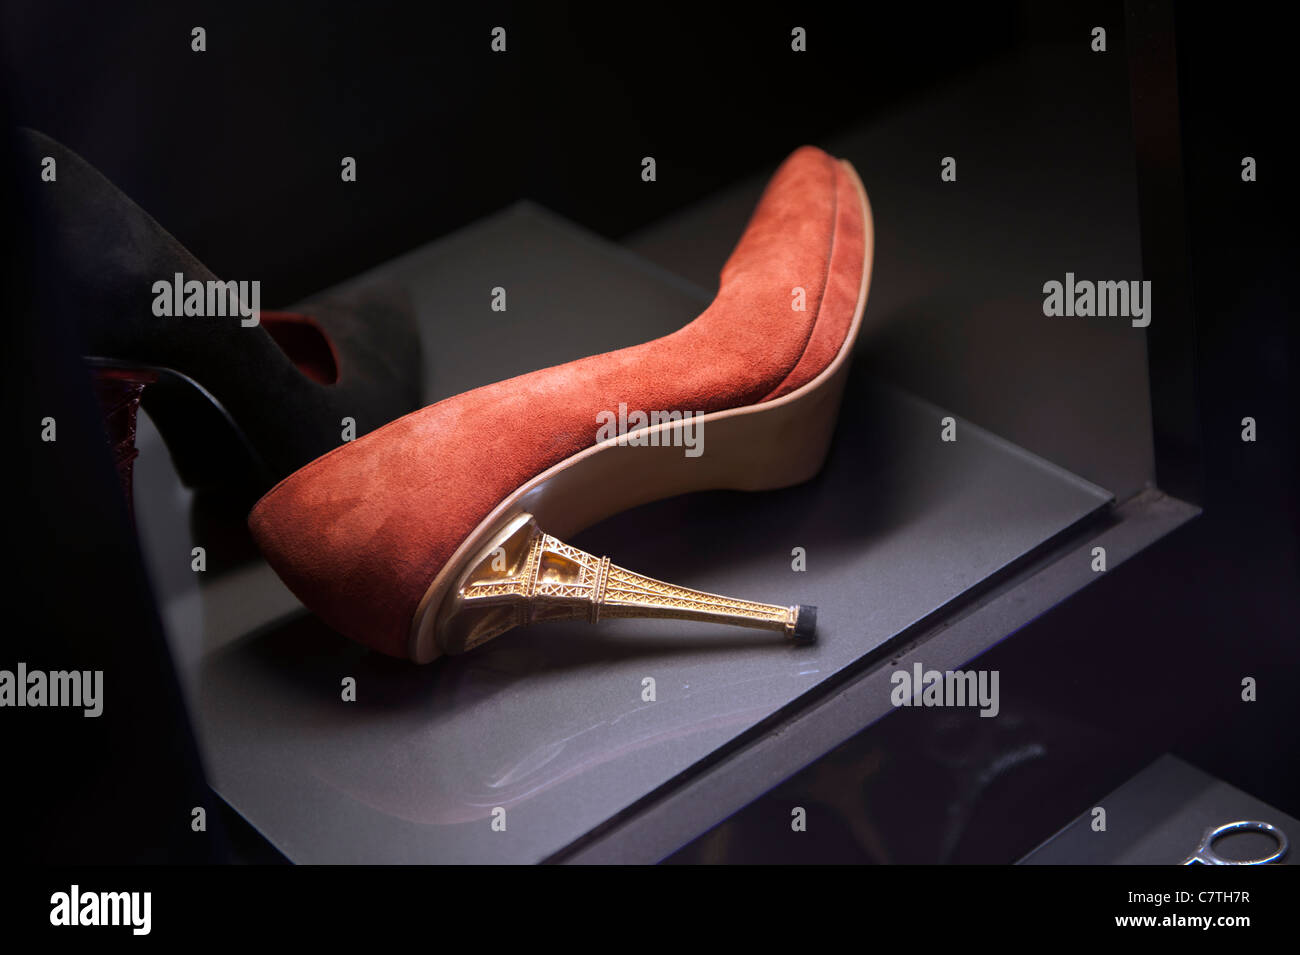 Paris, France. The Eiffel Tower and shoe showing Tower heels on display in  first floor exhibition space Stock Photo - Alamy